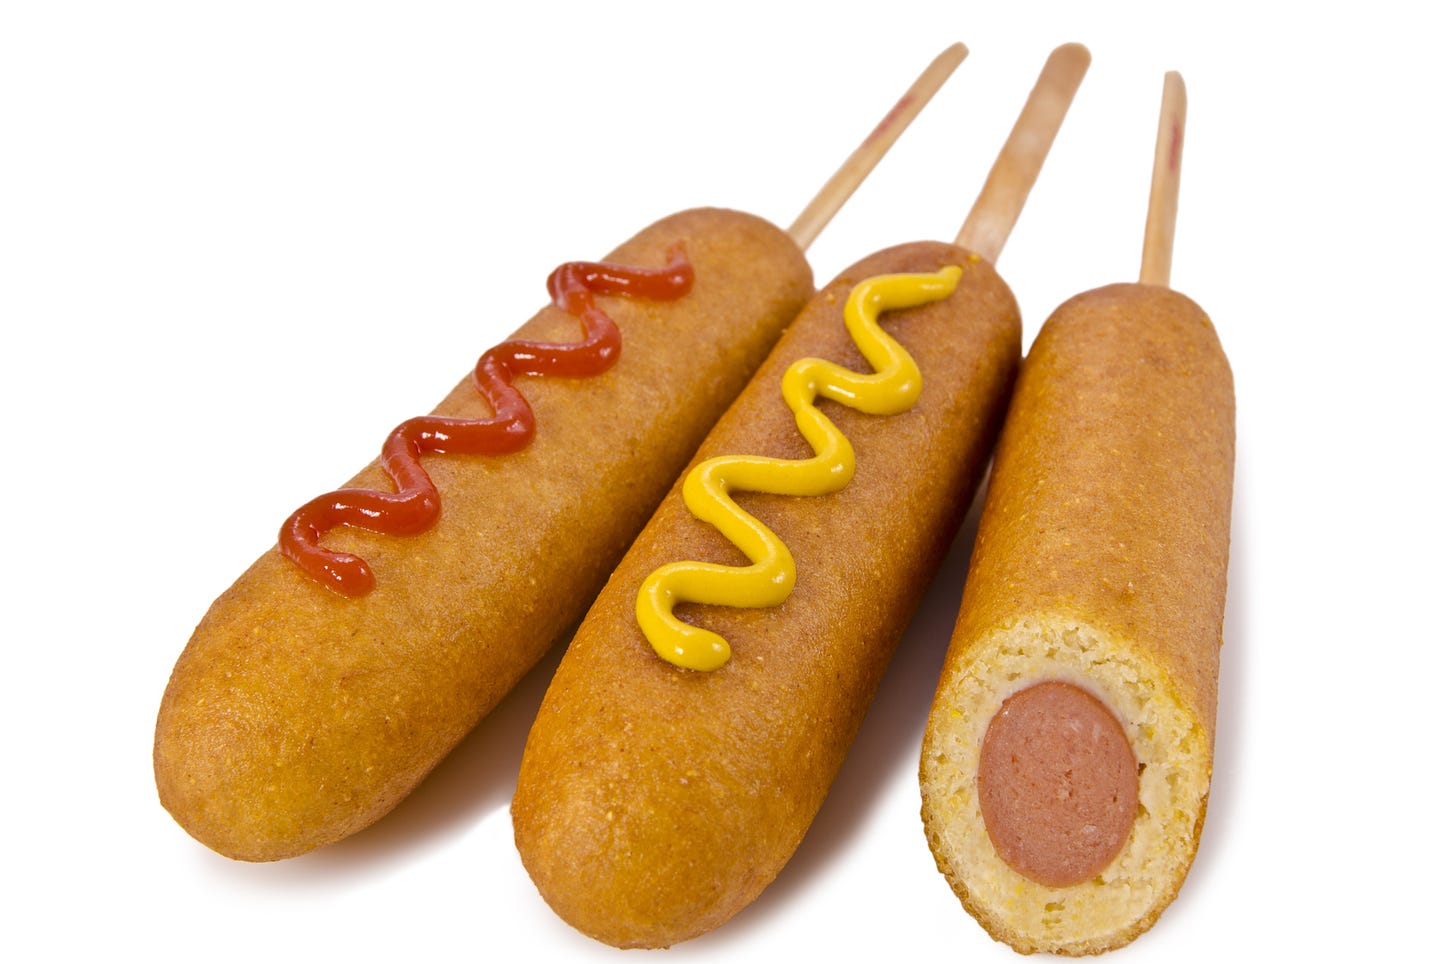 3 corndogs side by side with ketchup and mustard and a bite out of one.